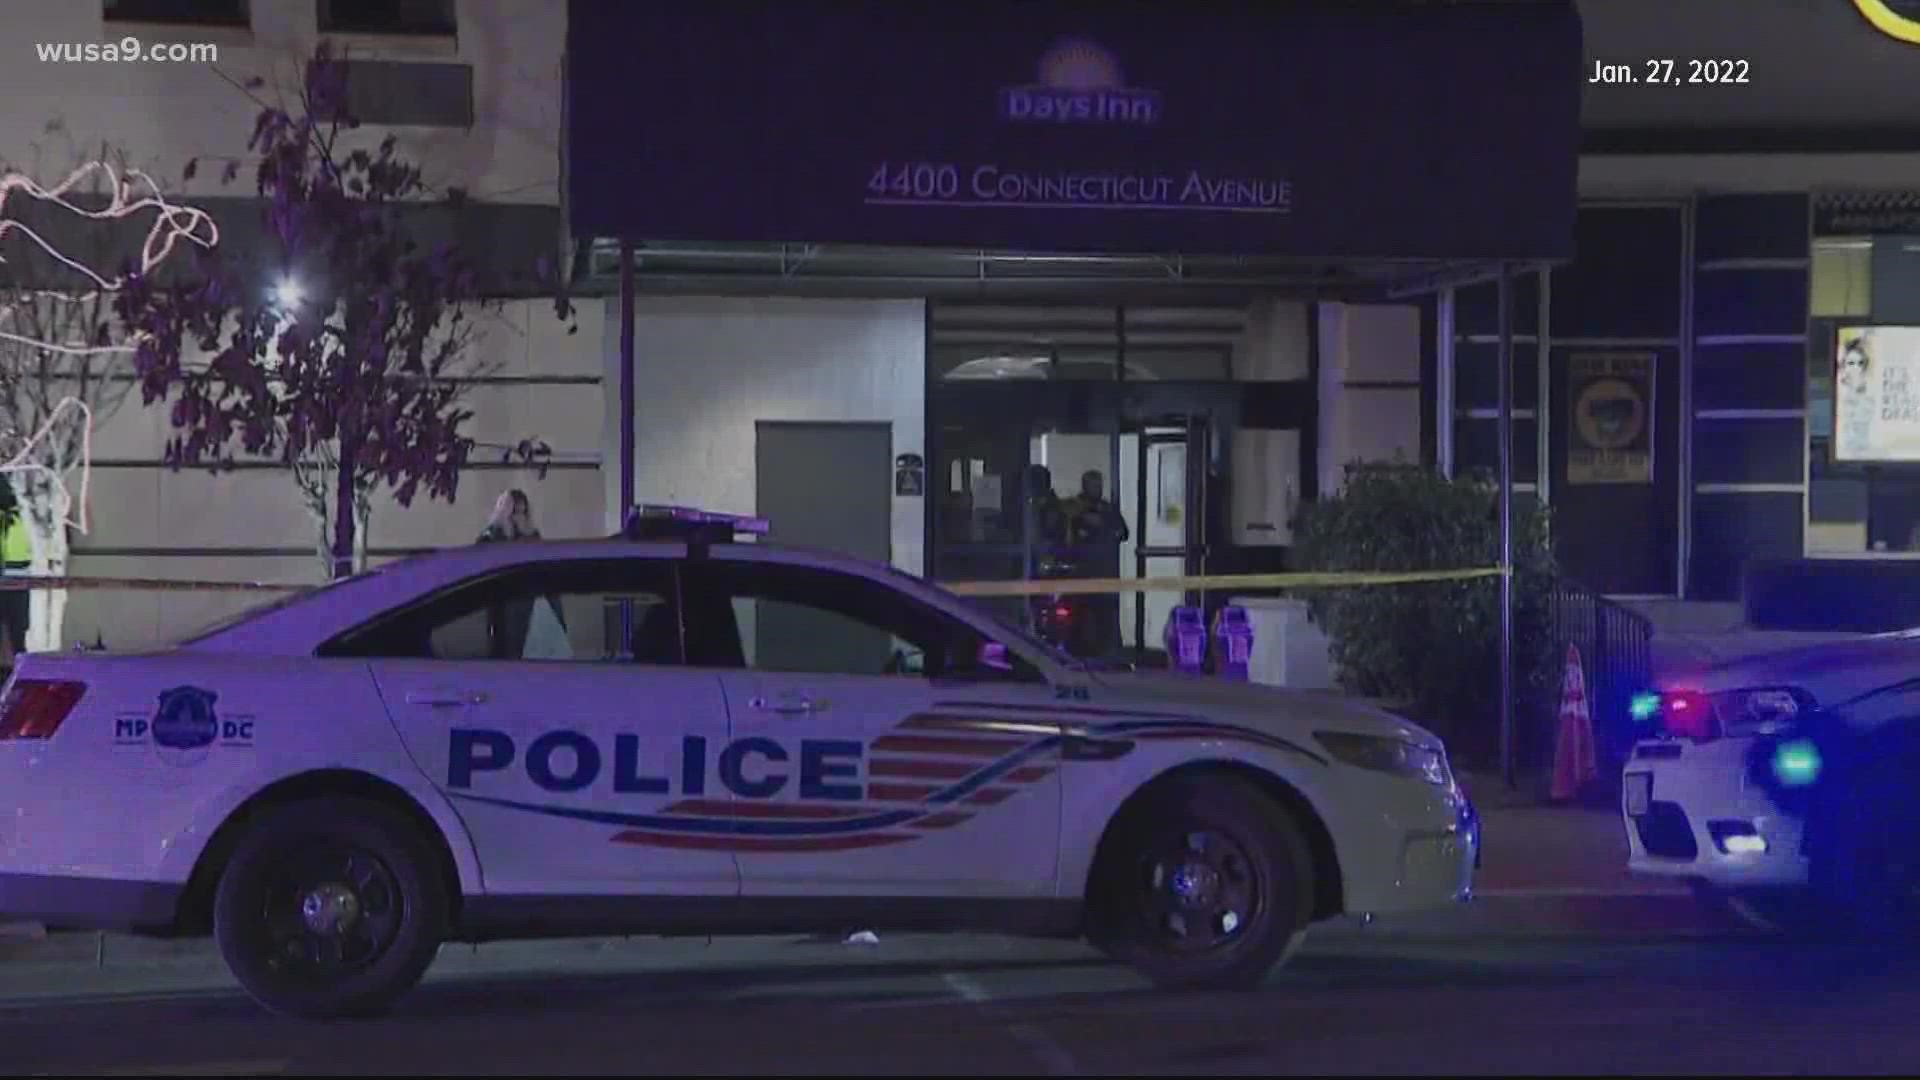 Metropolitan Police tell us 20-year-old Dasha Cleary was one of FIVE people shot -- at a Days Inn.